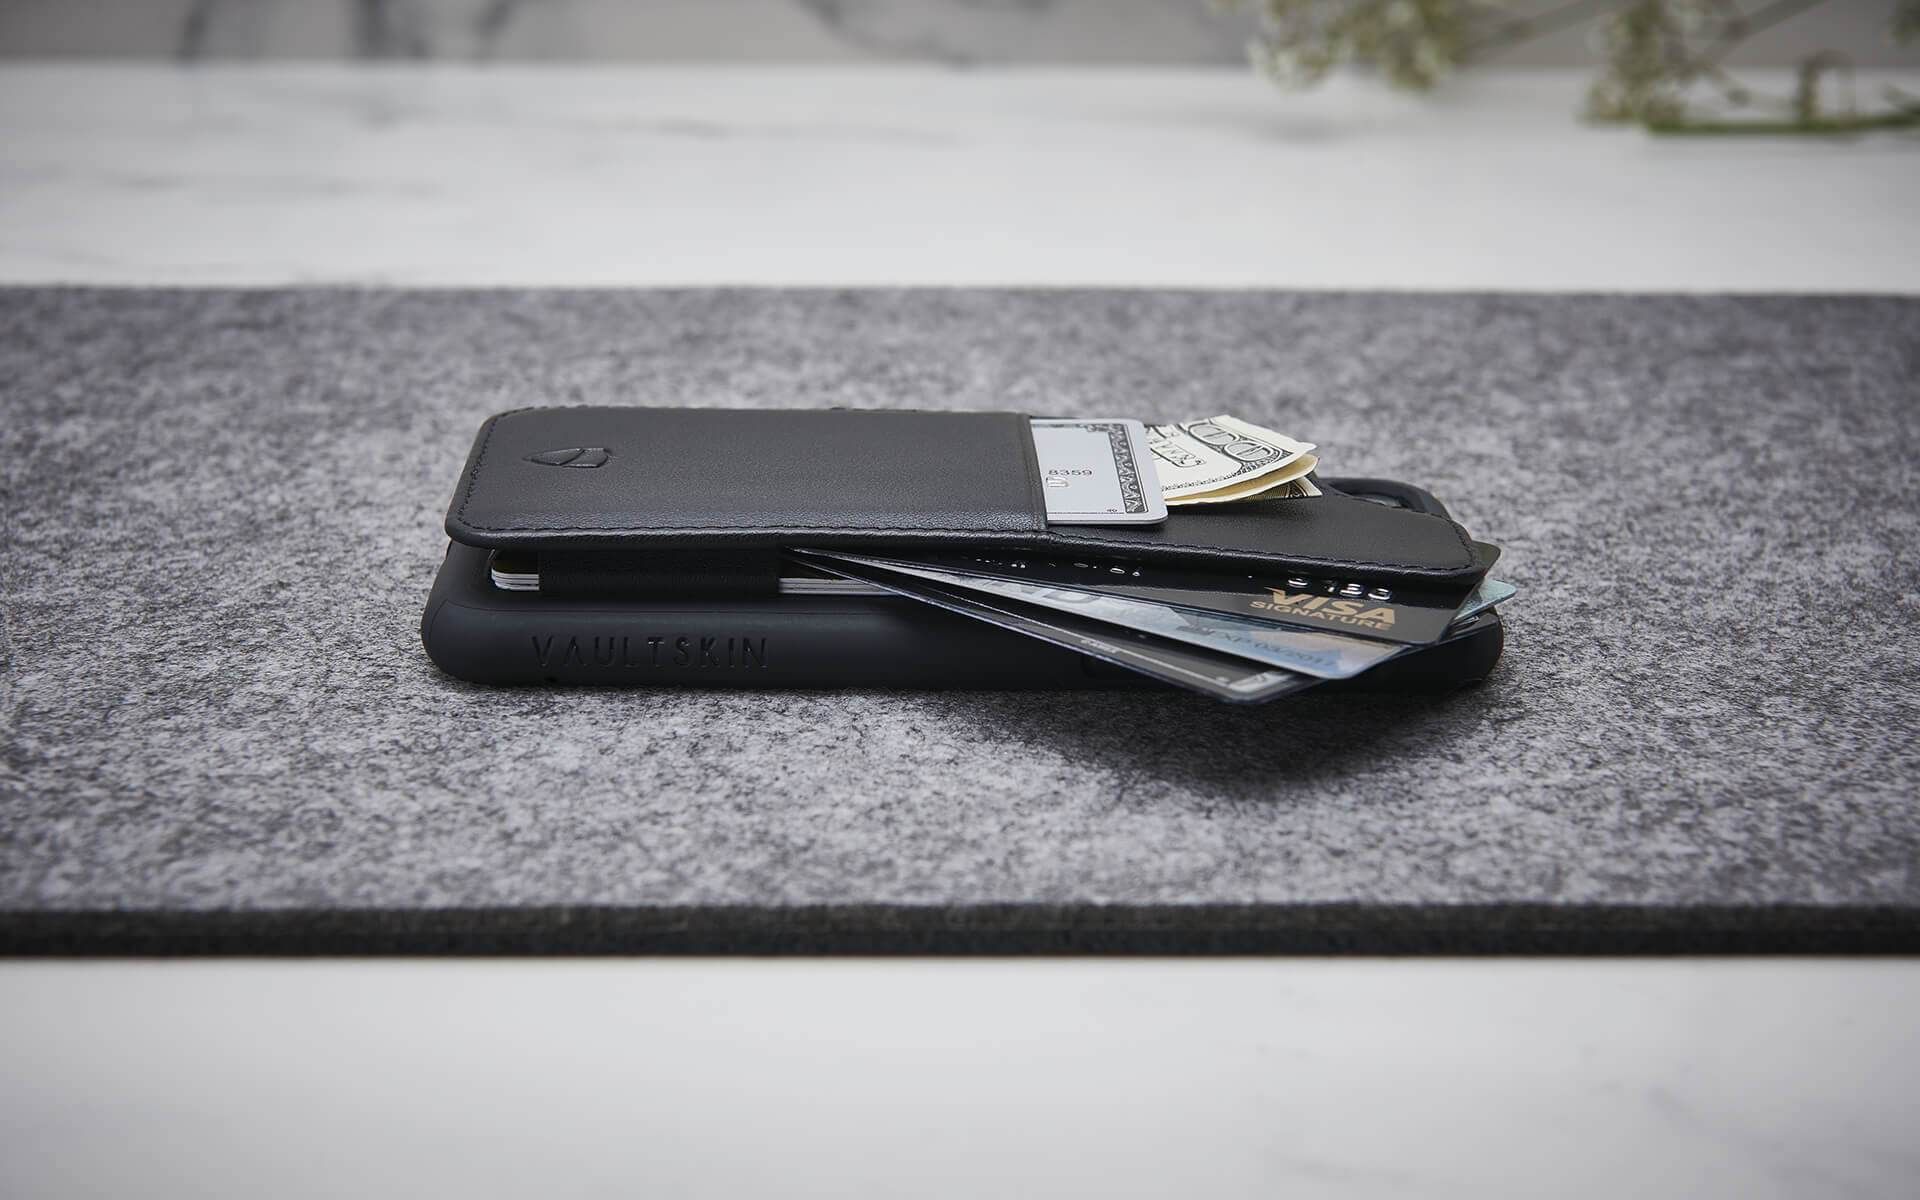 iphone wallet with phone holder